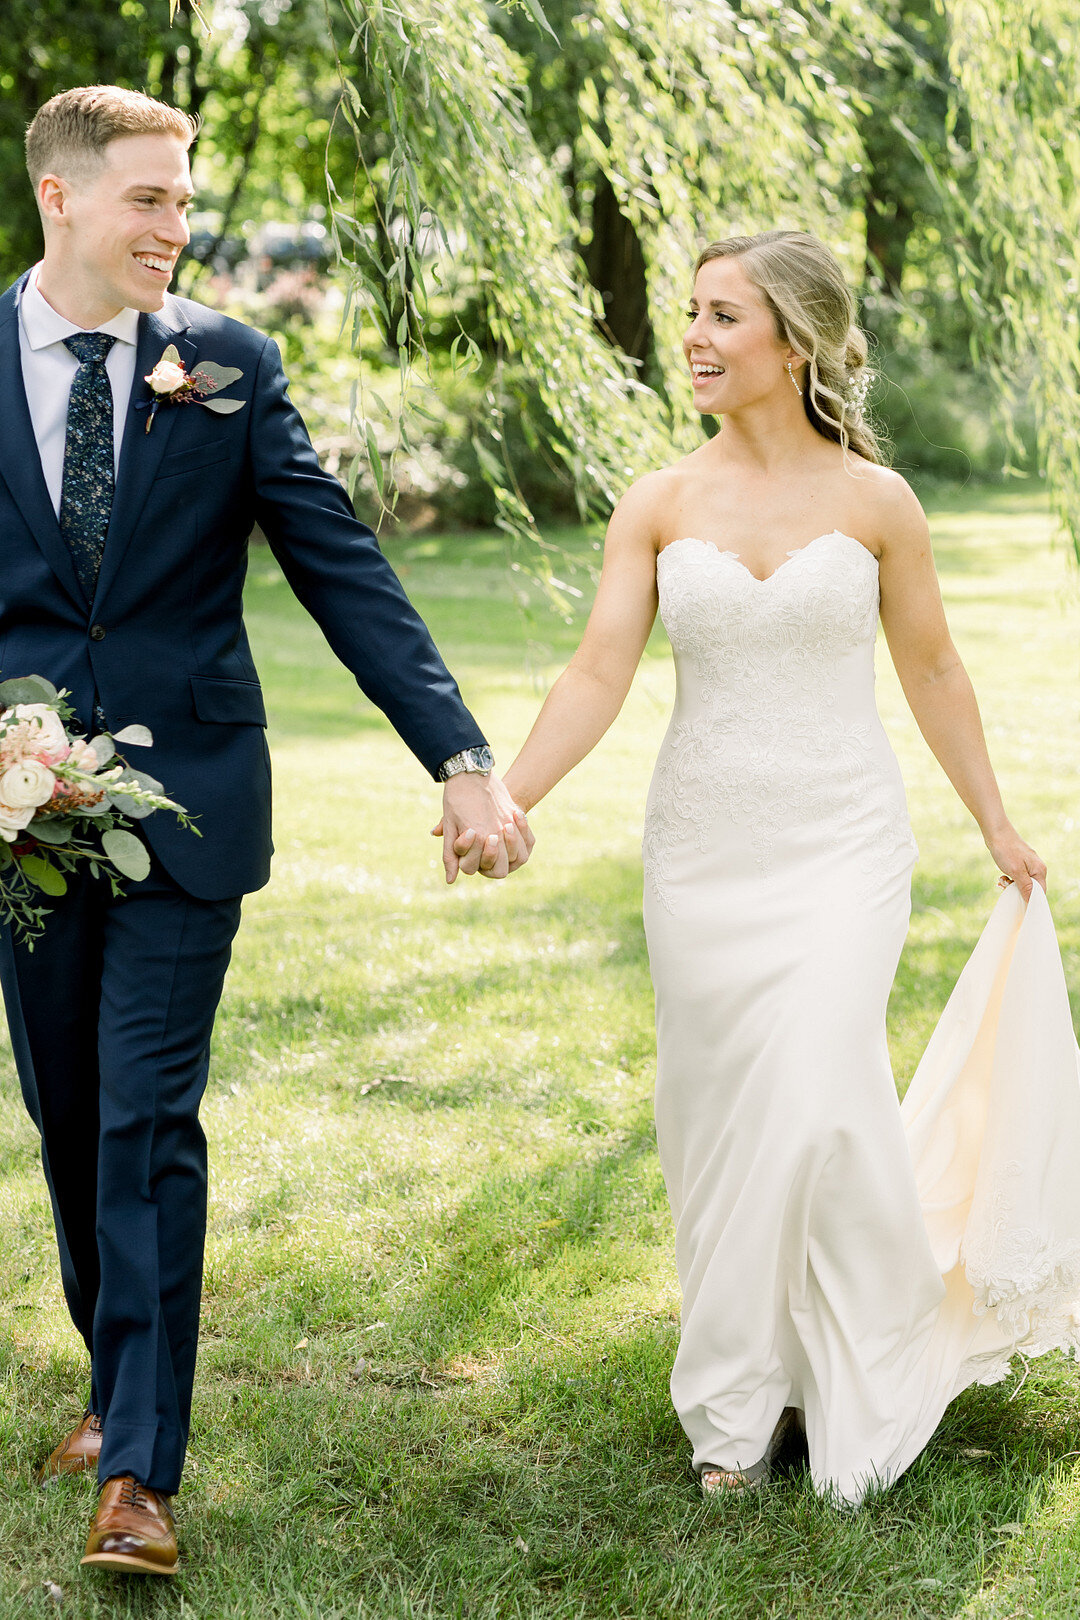 From Boston to PA, Kim and Kyle's Charming Wedding At Historic Acres of Hershey